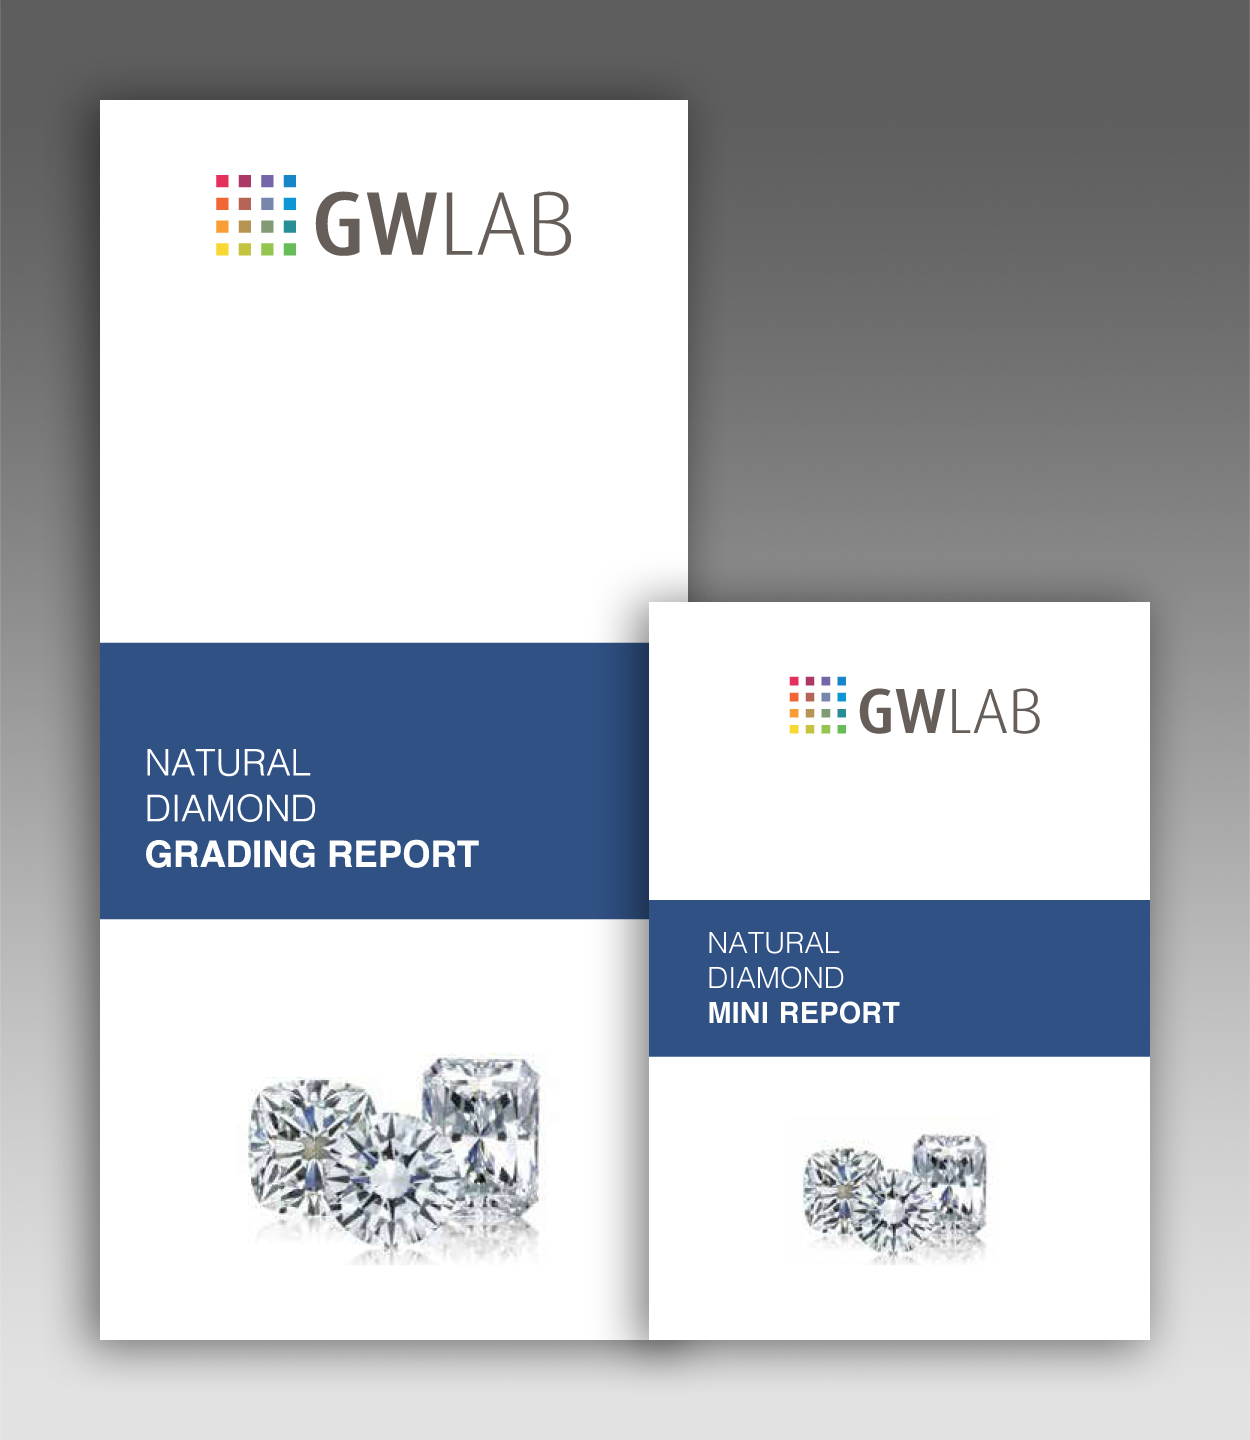 GWLAB Natural Diamond Grading Report - Outer Cover